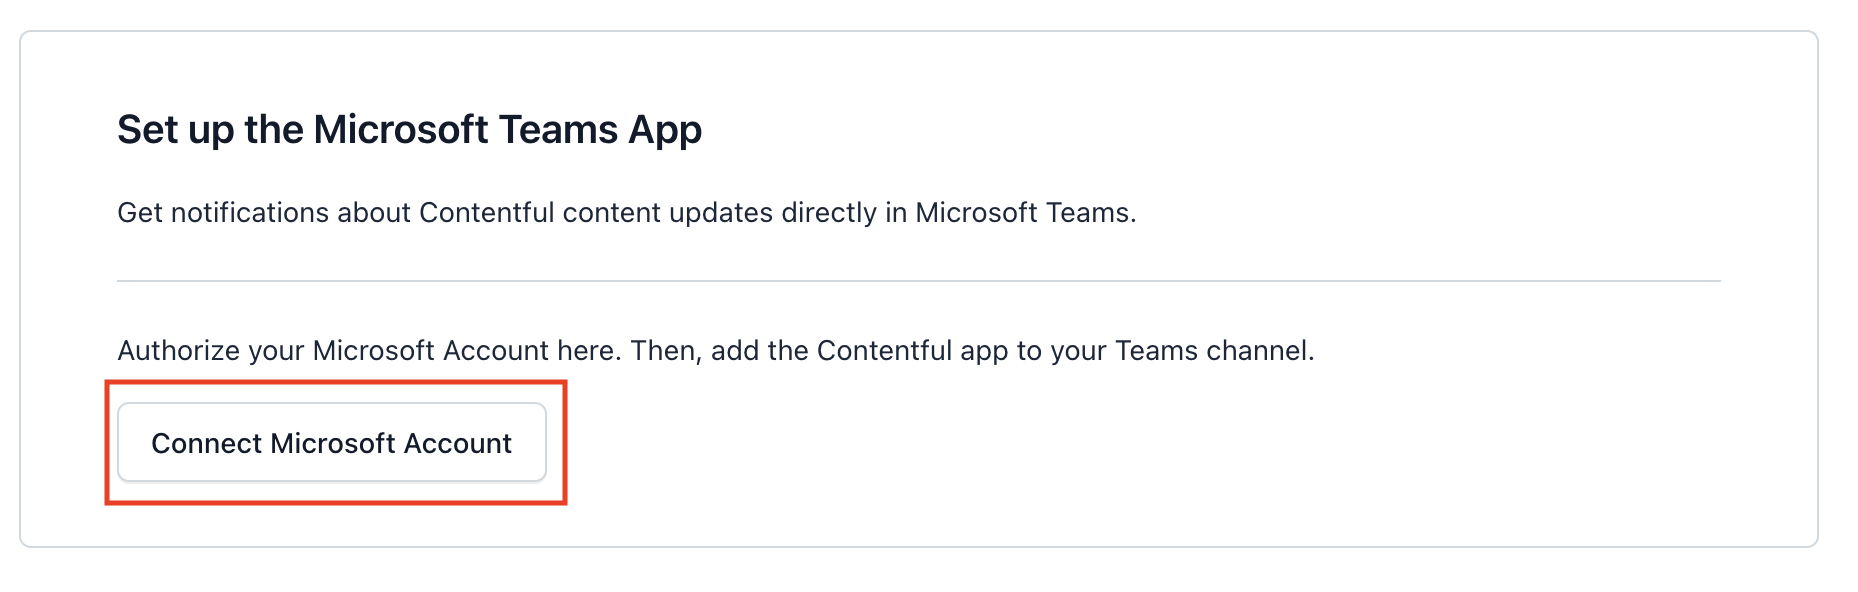 Microsoft Teams Connect Account